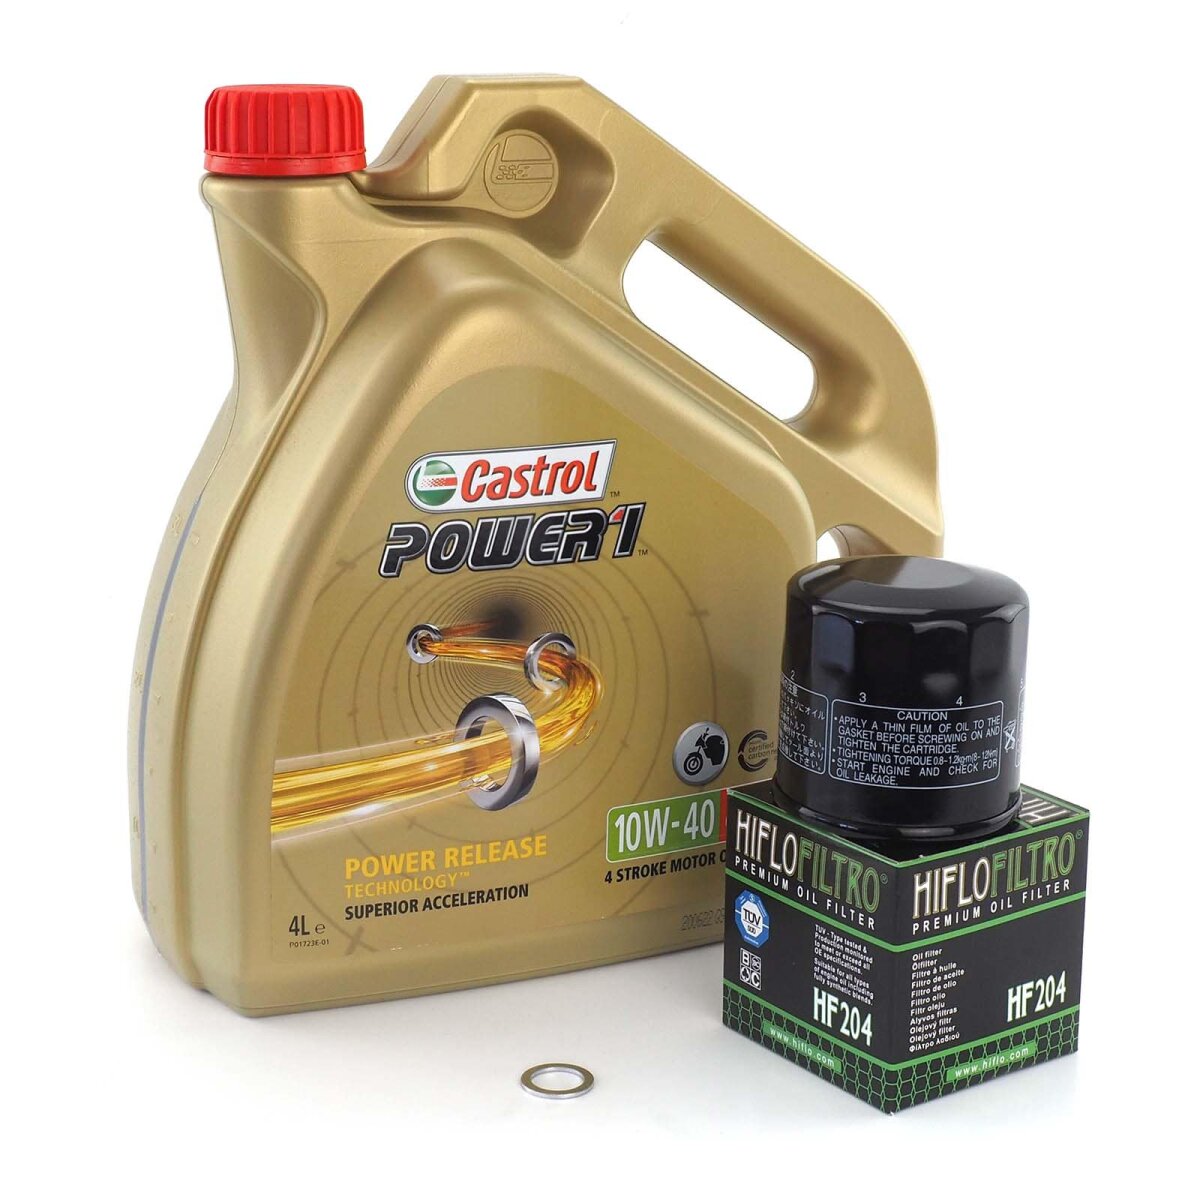 Castrol Engine Oil Change Kit Configurator with Oil Filter and 